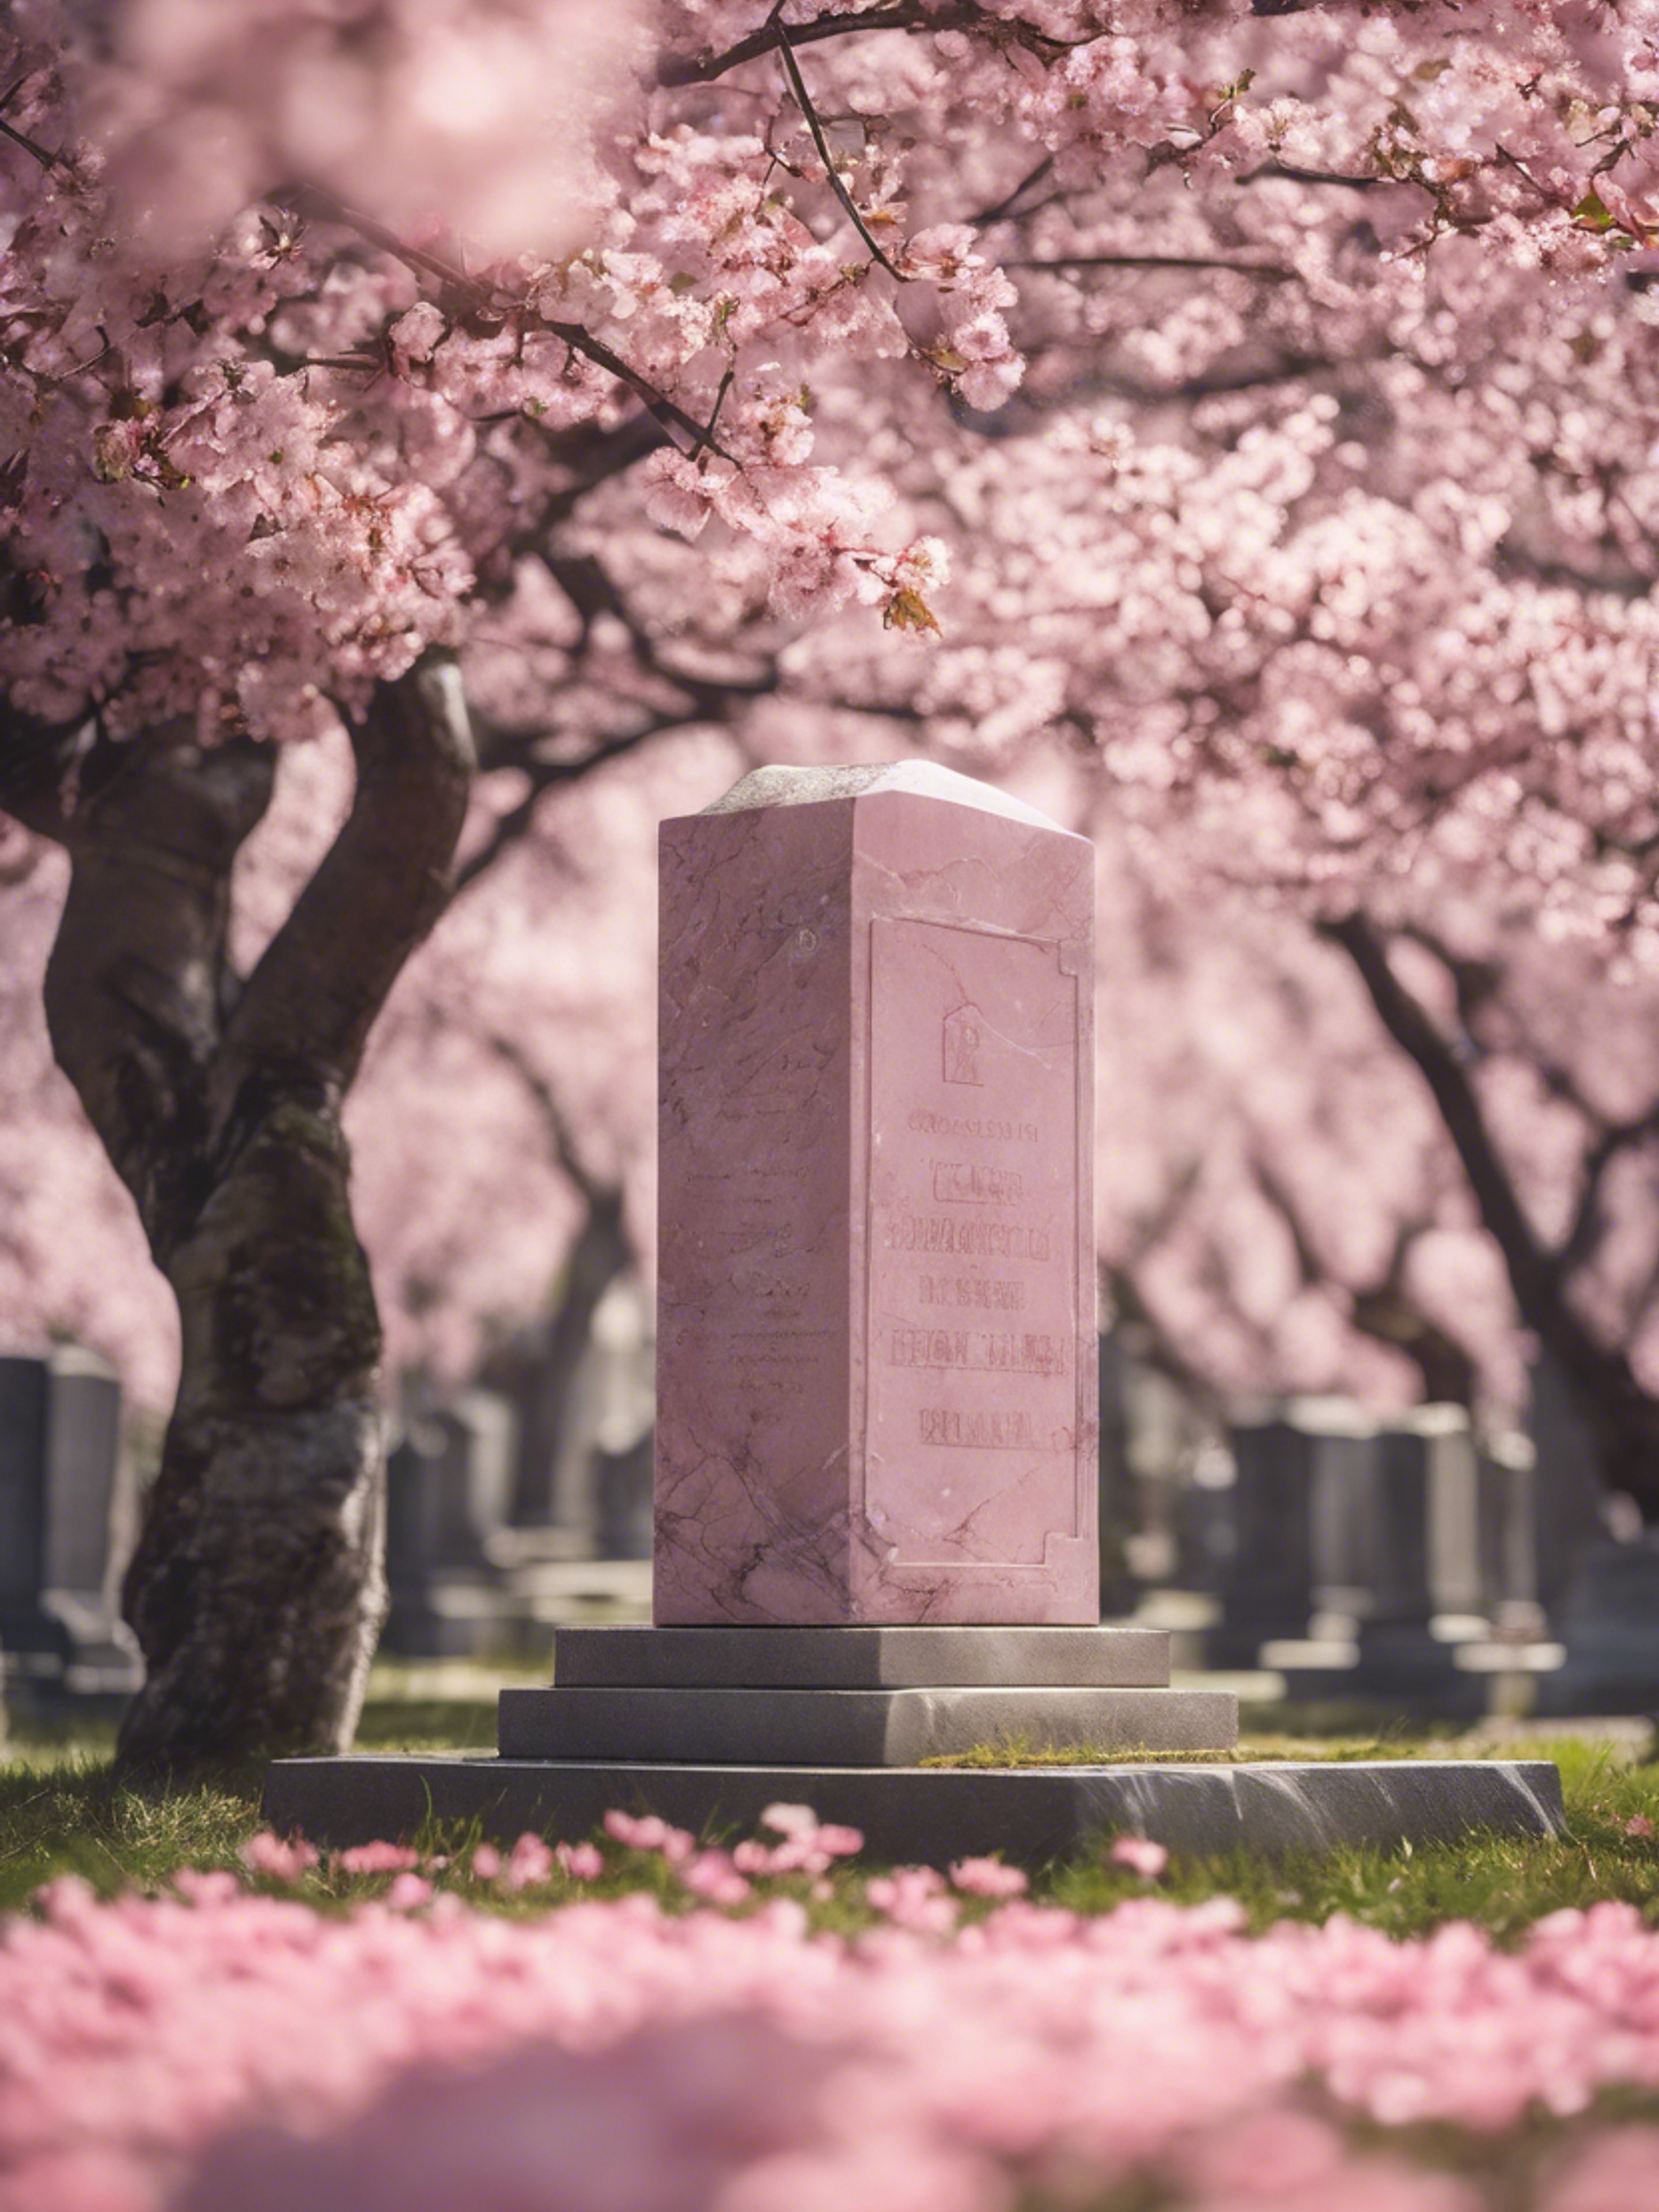 Pink marble headstone surrounded by blooming cherry blossom trees in a tranquil cemetery.壁紙[6605d21f56504ecfad88]